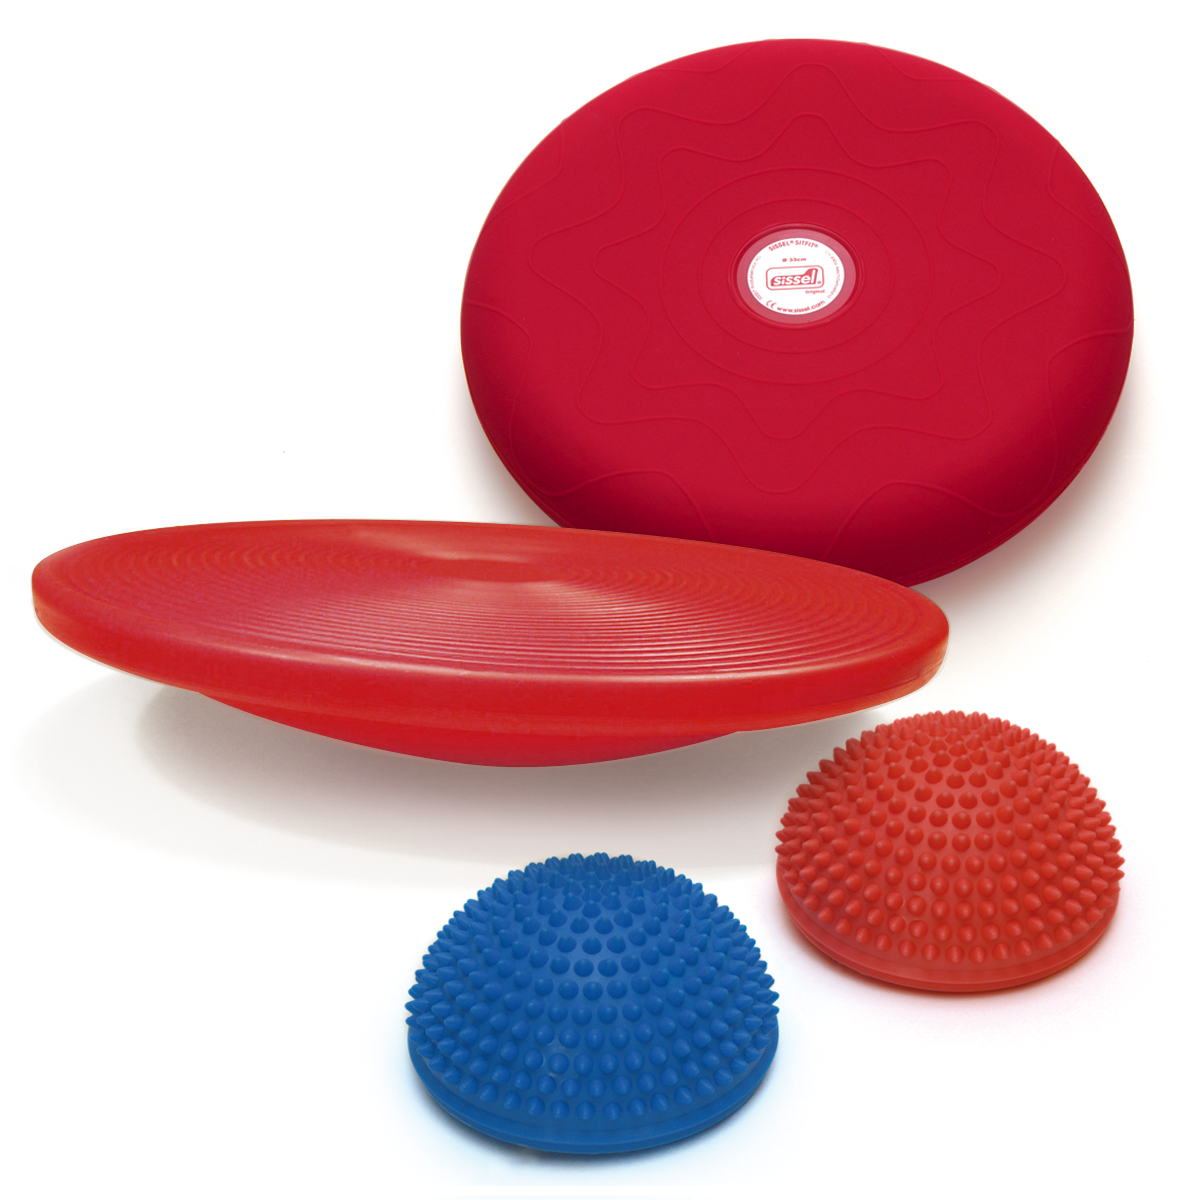 KIT EQUILIBRIO: Spiky Dome, Balanced Board e Sitfit 33 rosso